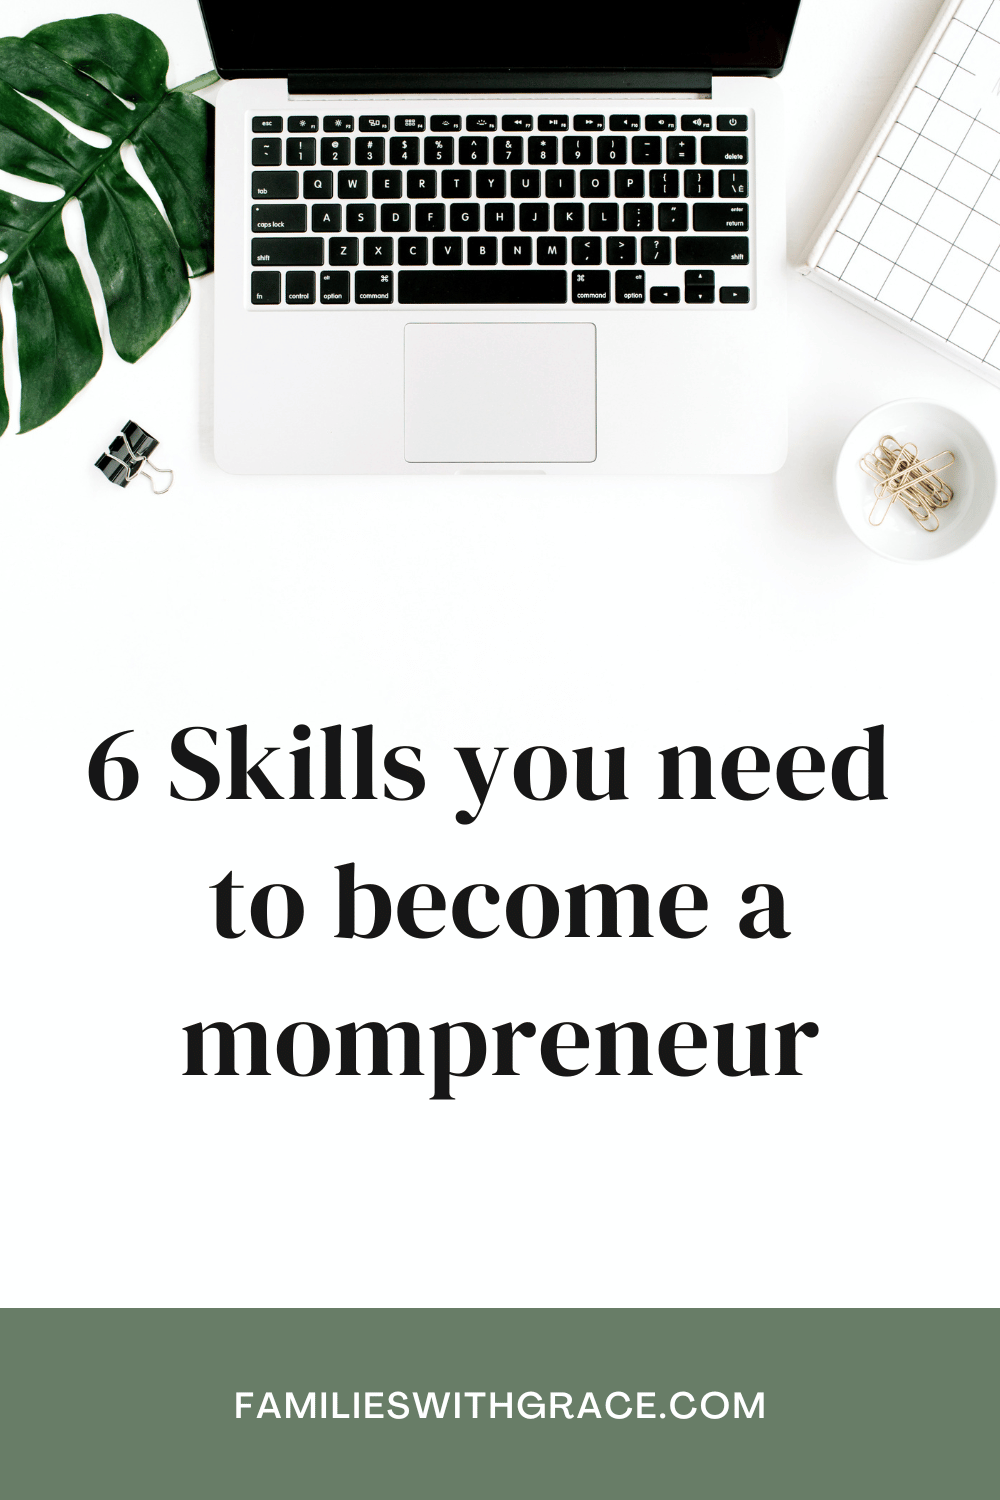 6 Skills you need to become a mompreneur